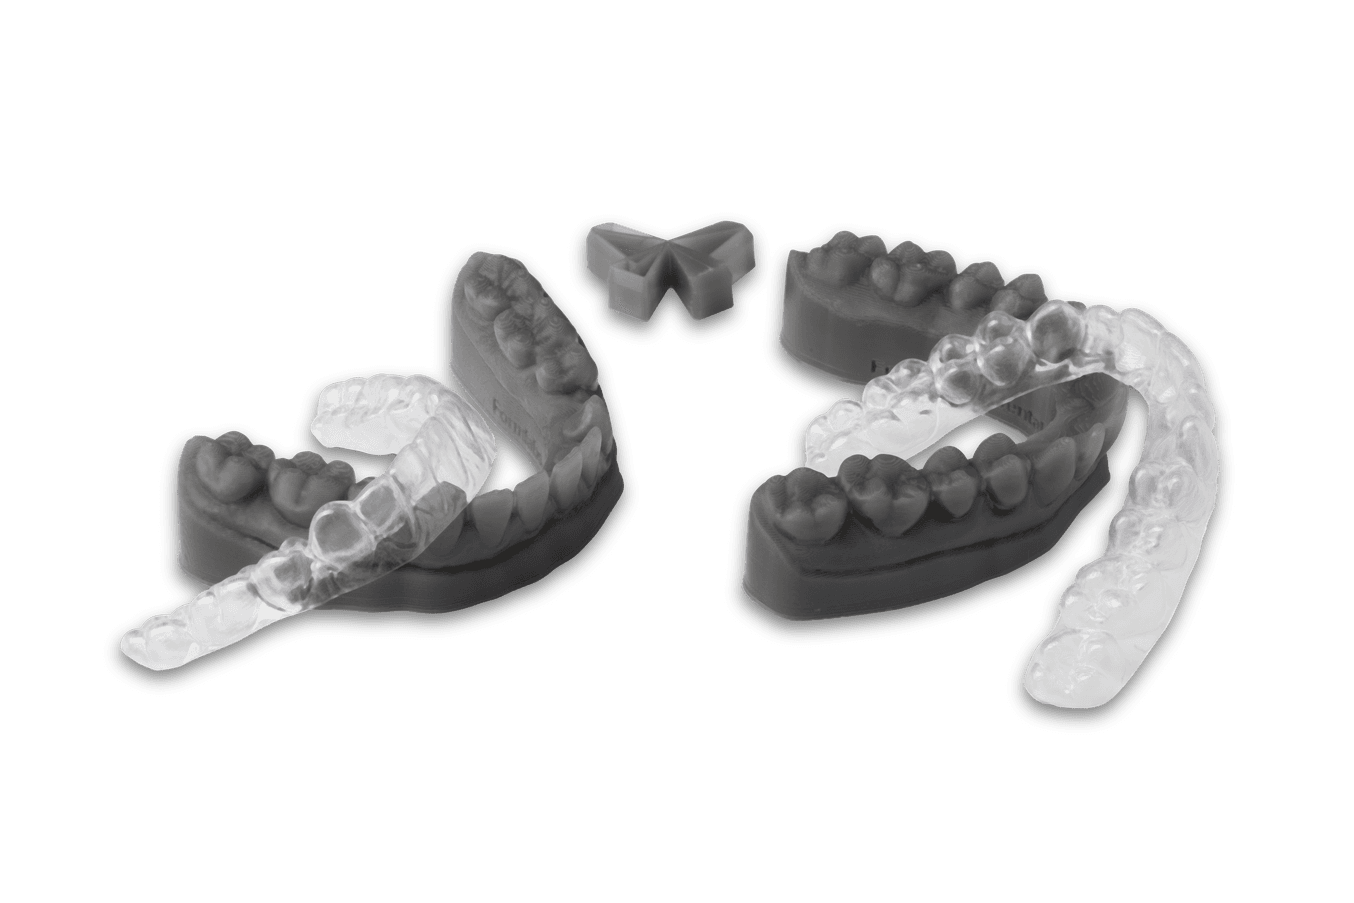 Grey 3D printed dental model and clear aligners